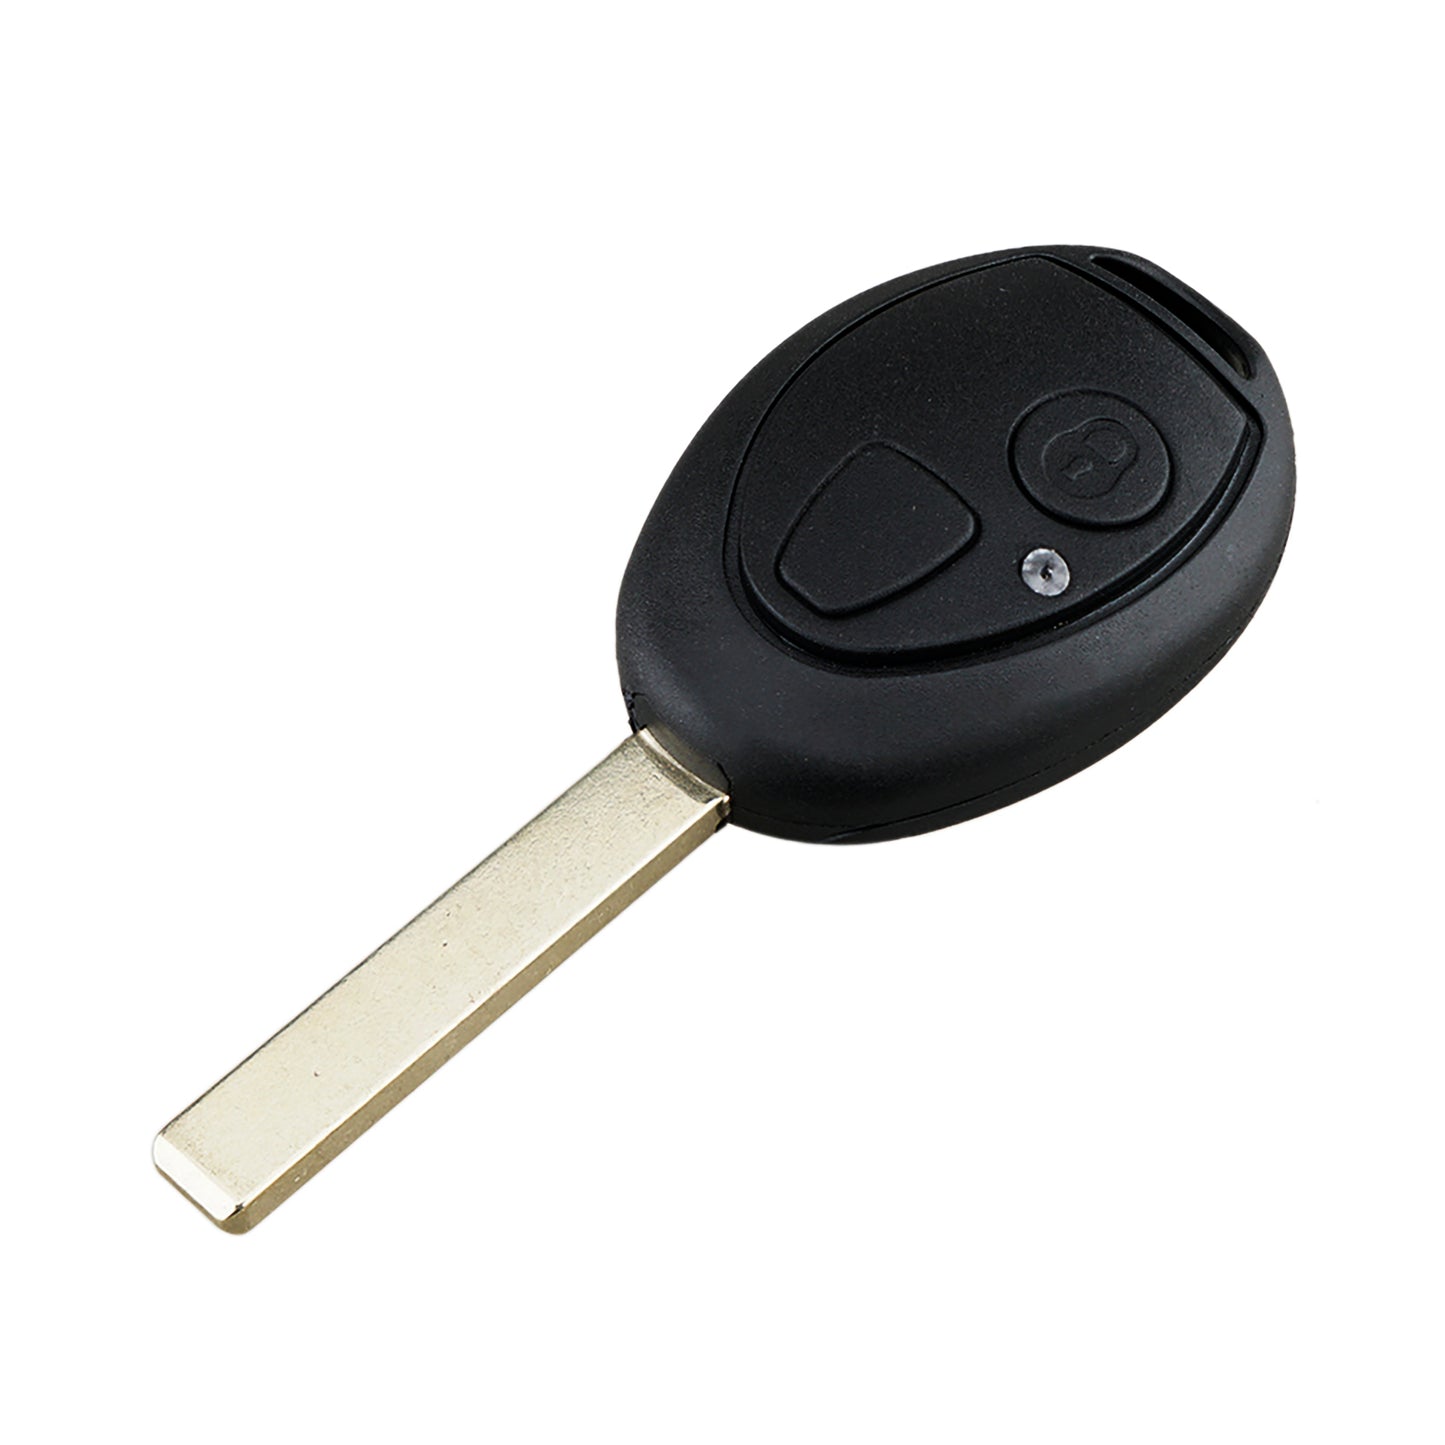 2 Buttons 315MHz Smart Keyless Entry Car Fob Remote Key For 1999 - 2004 Land Rover Discovery FCC ID : N5FVALTX3 SKU : J601